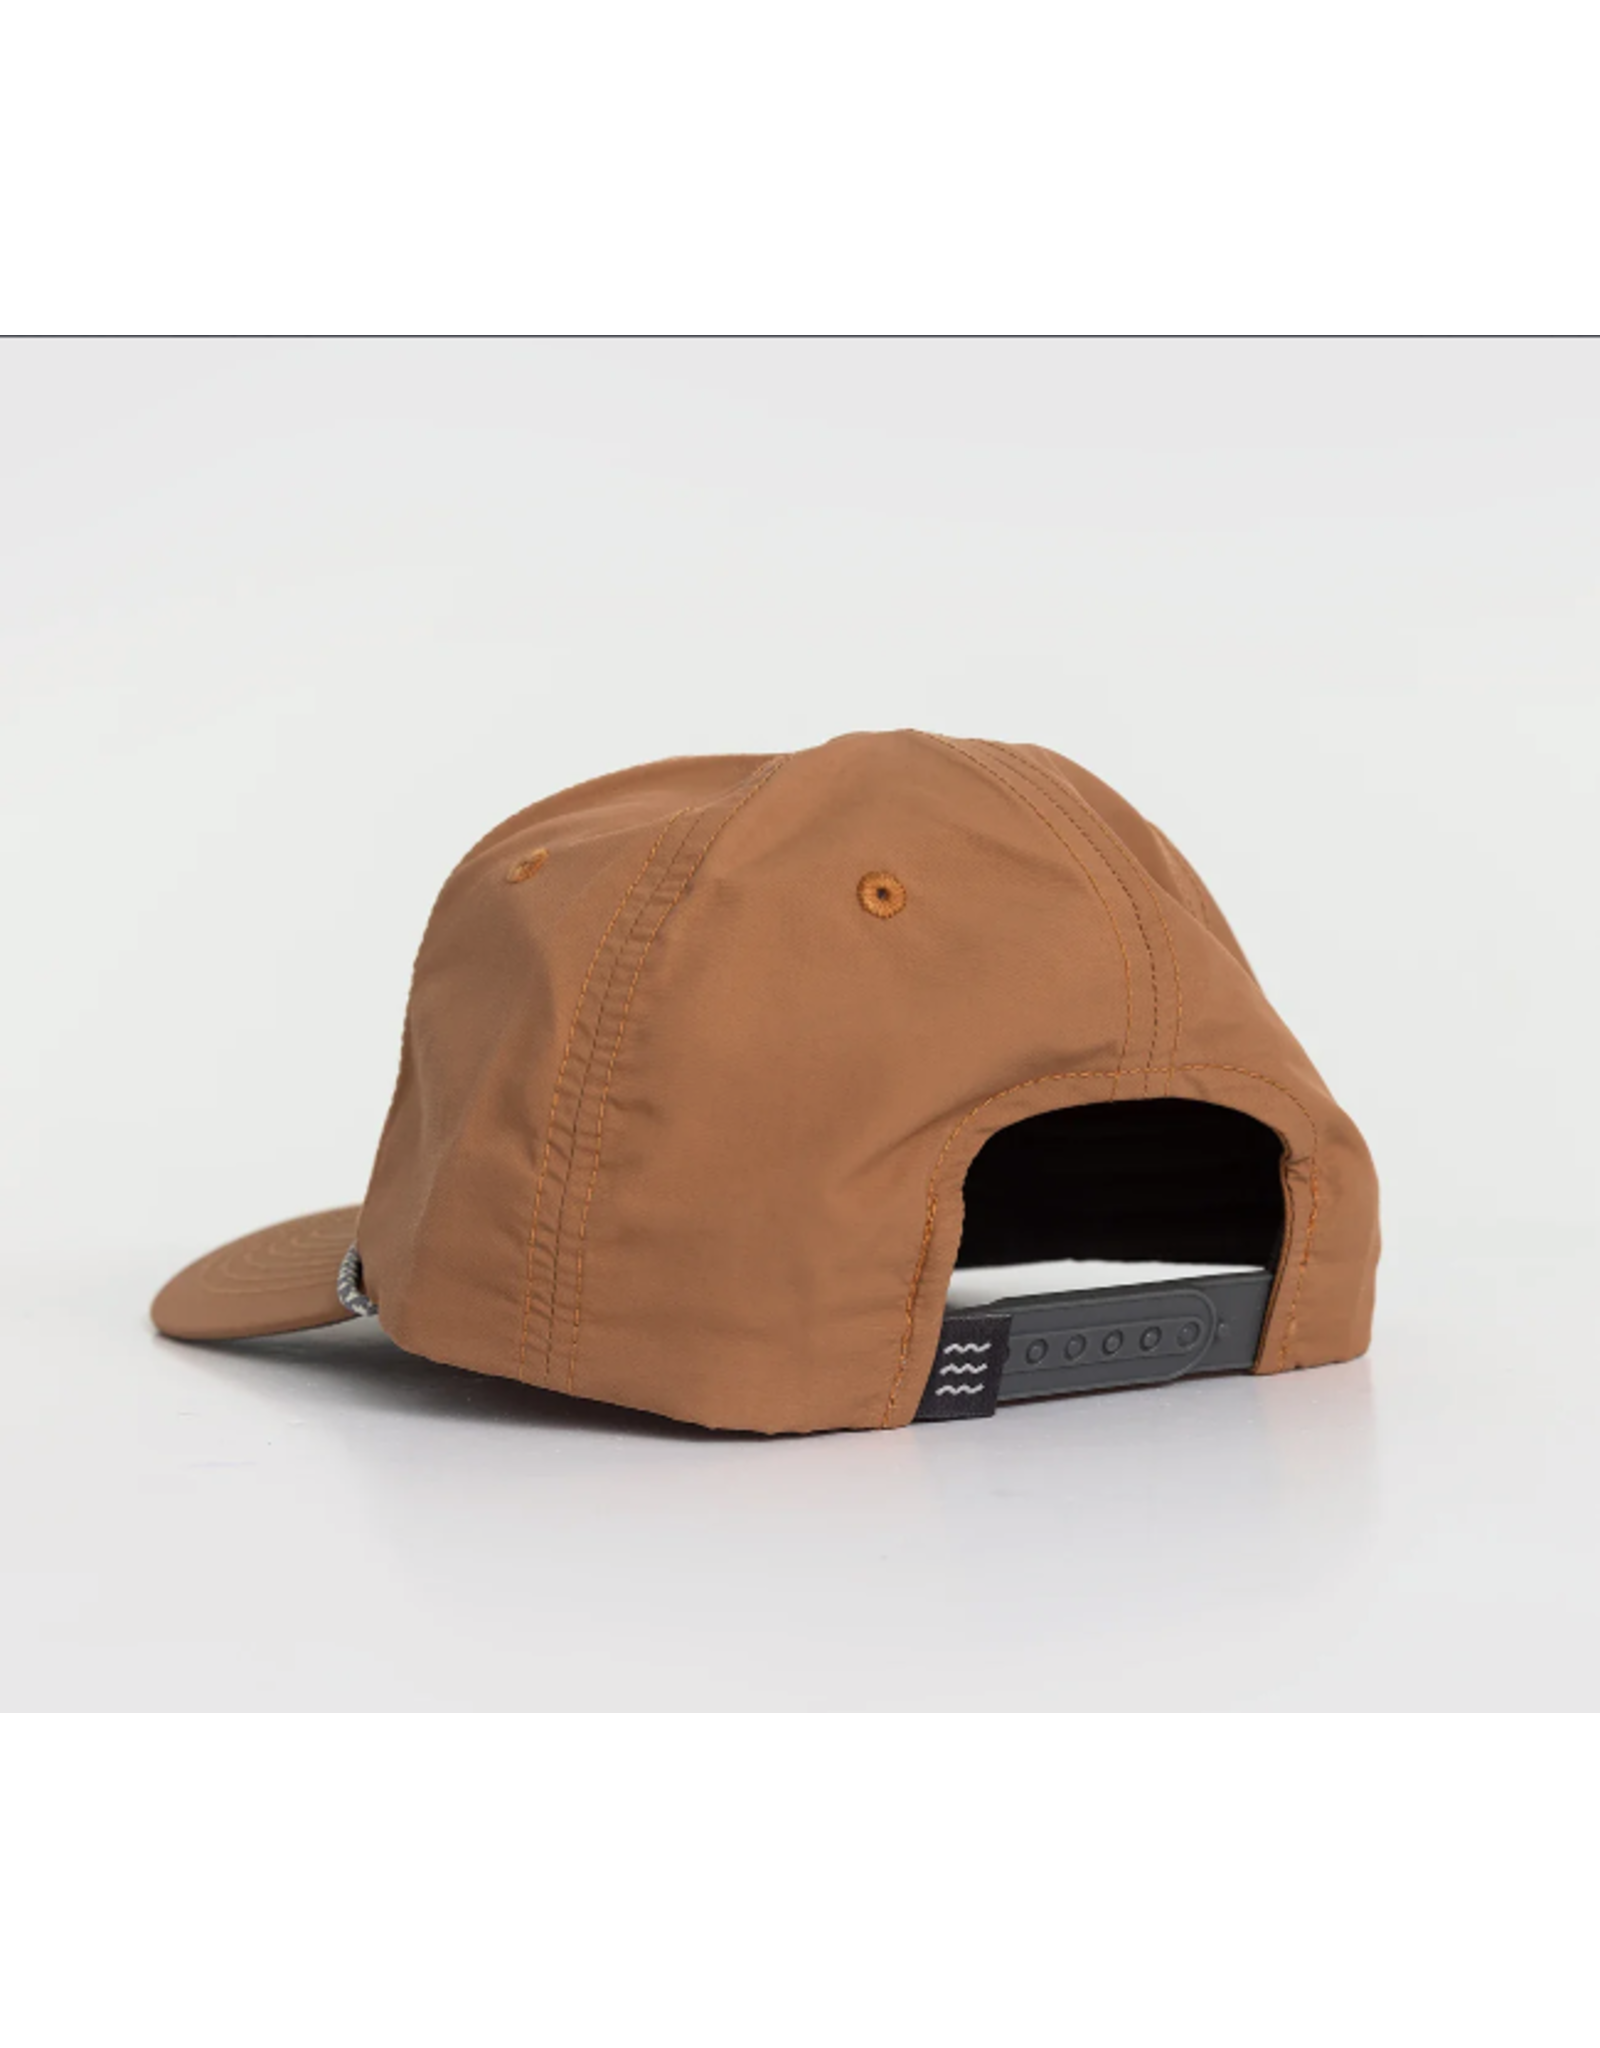 FREEFLY Wave 5-Panel Hat